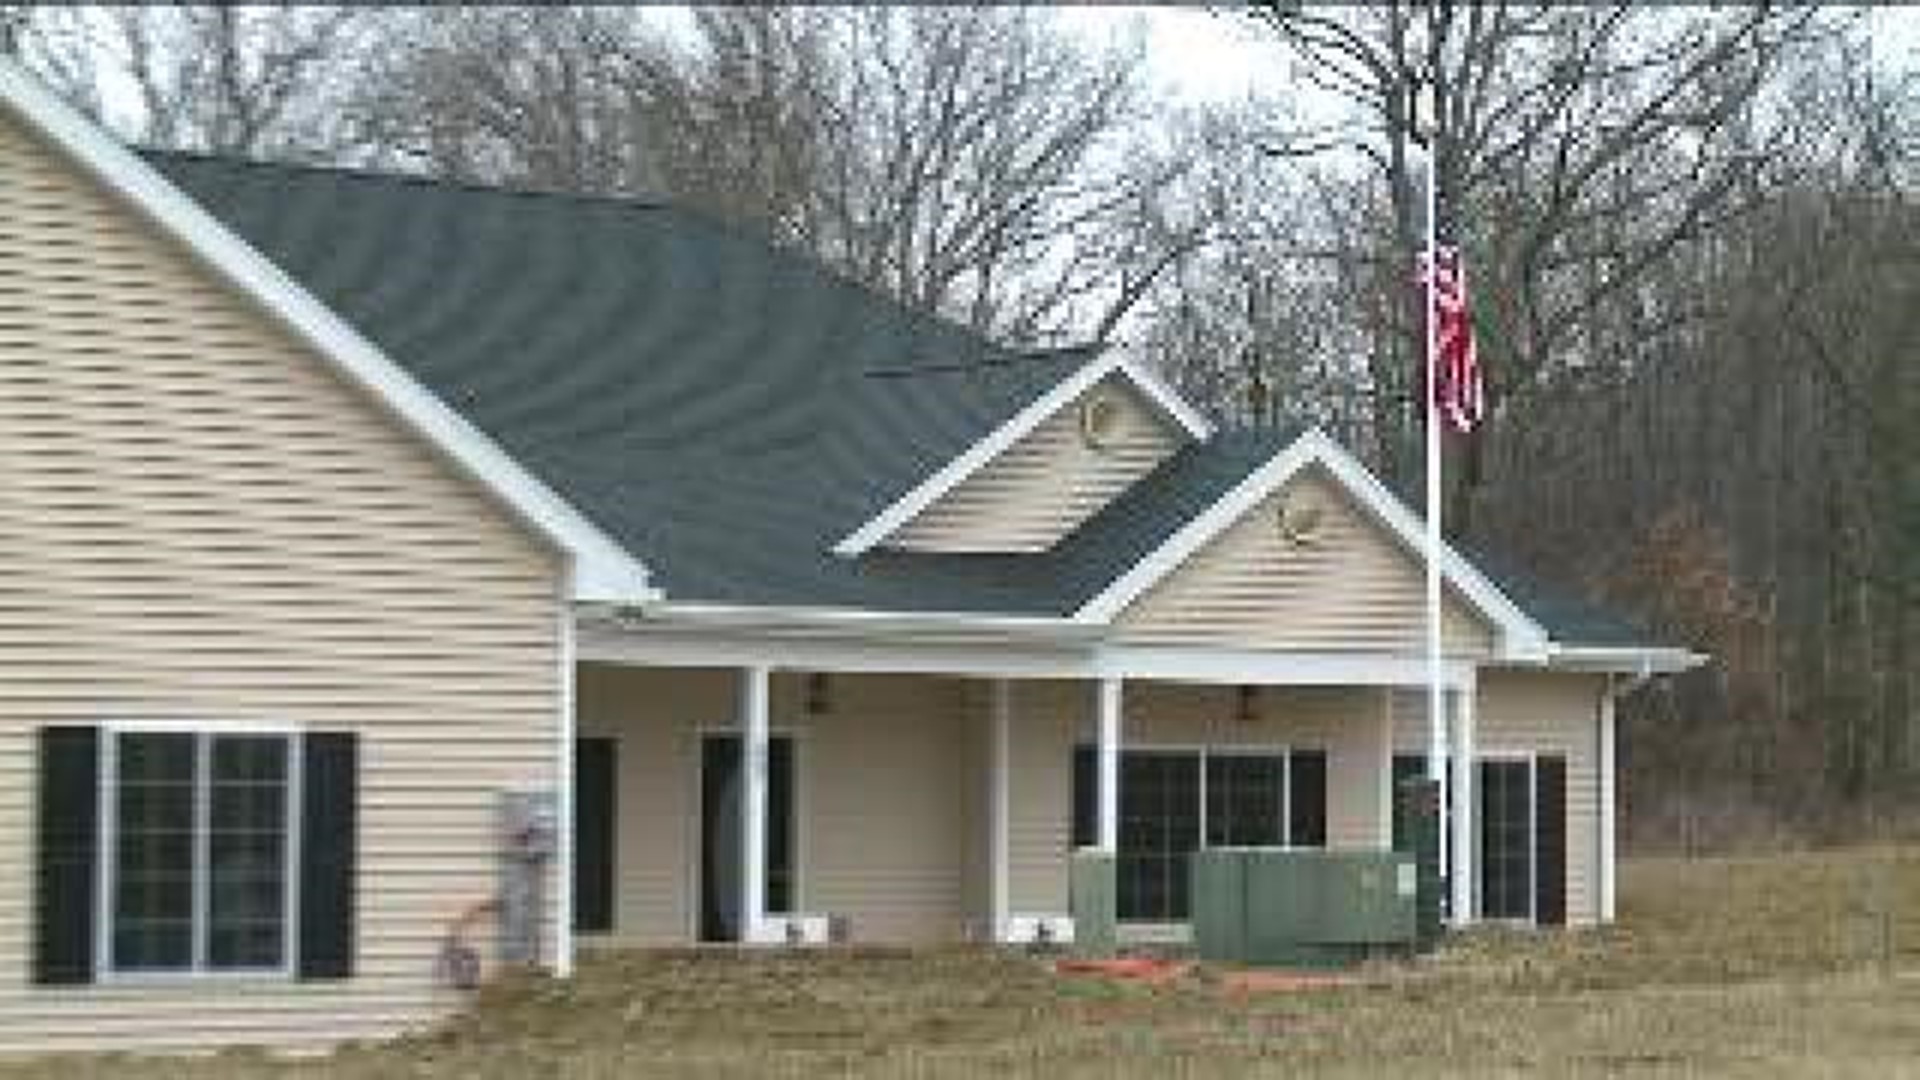 Wounded Veteran Gets Key To New Home